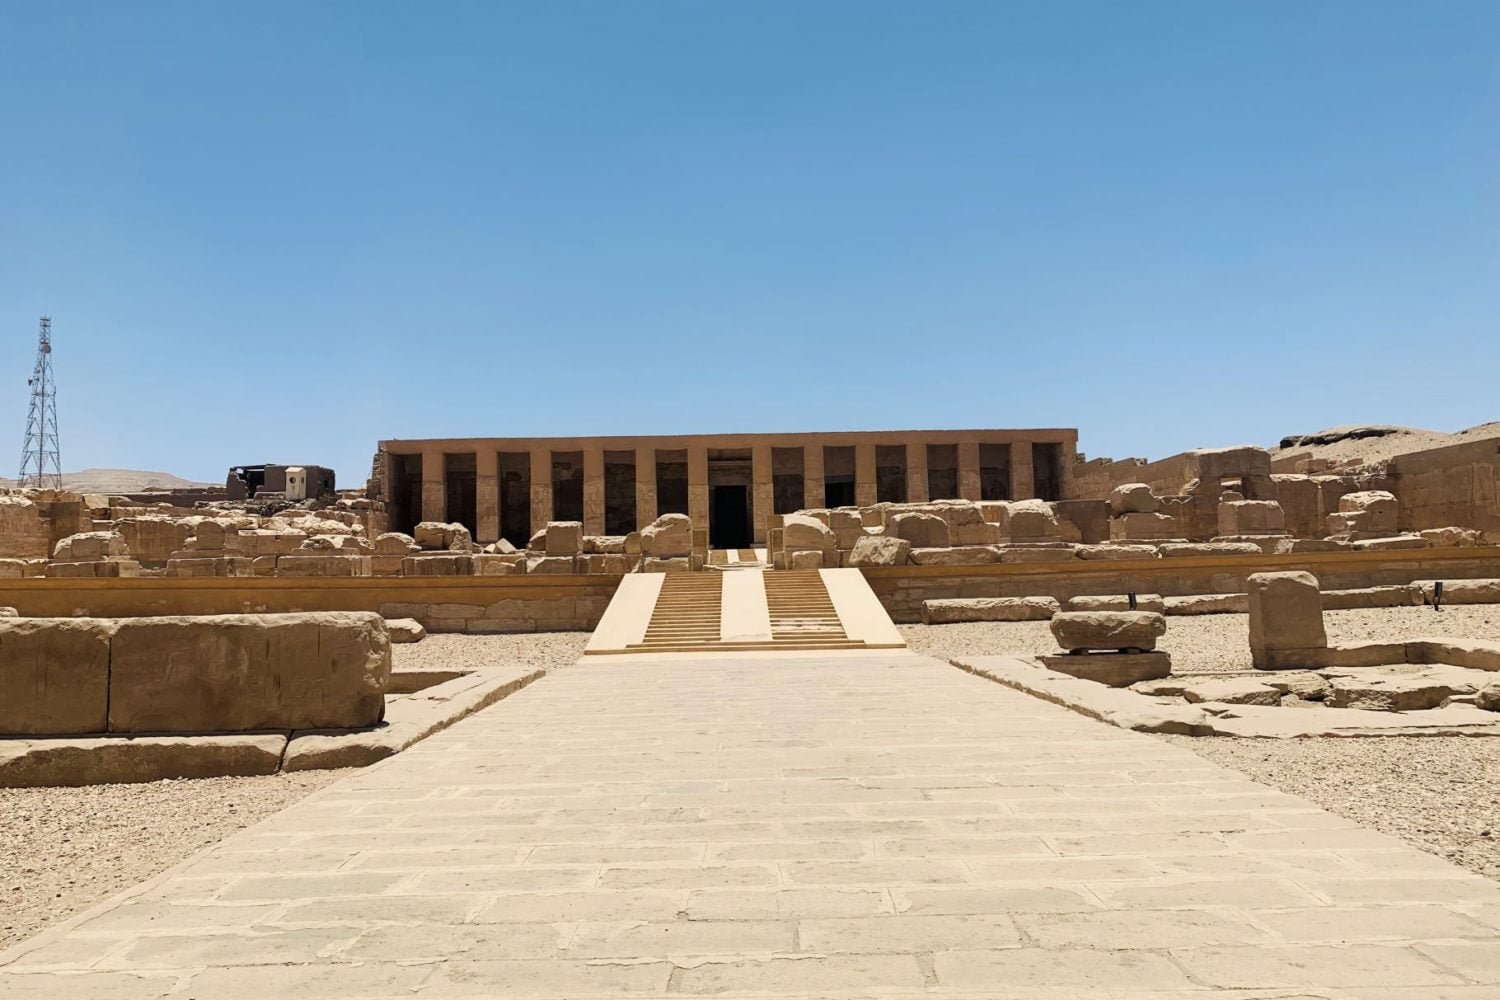 Full Day Tour To Dendera Temple And Abydos Temple From Luxor